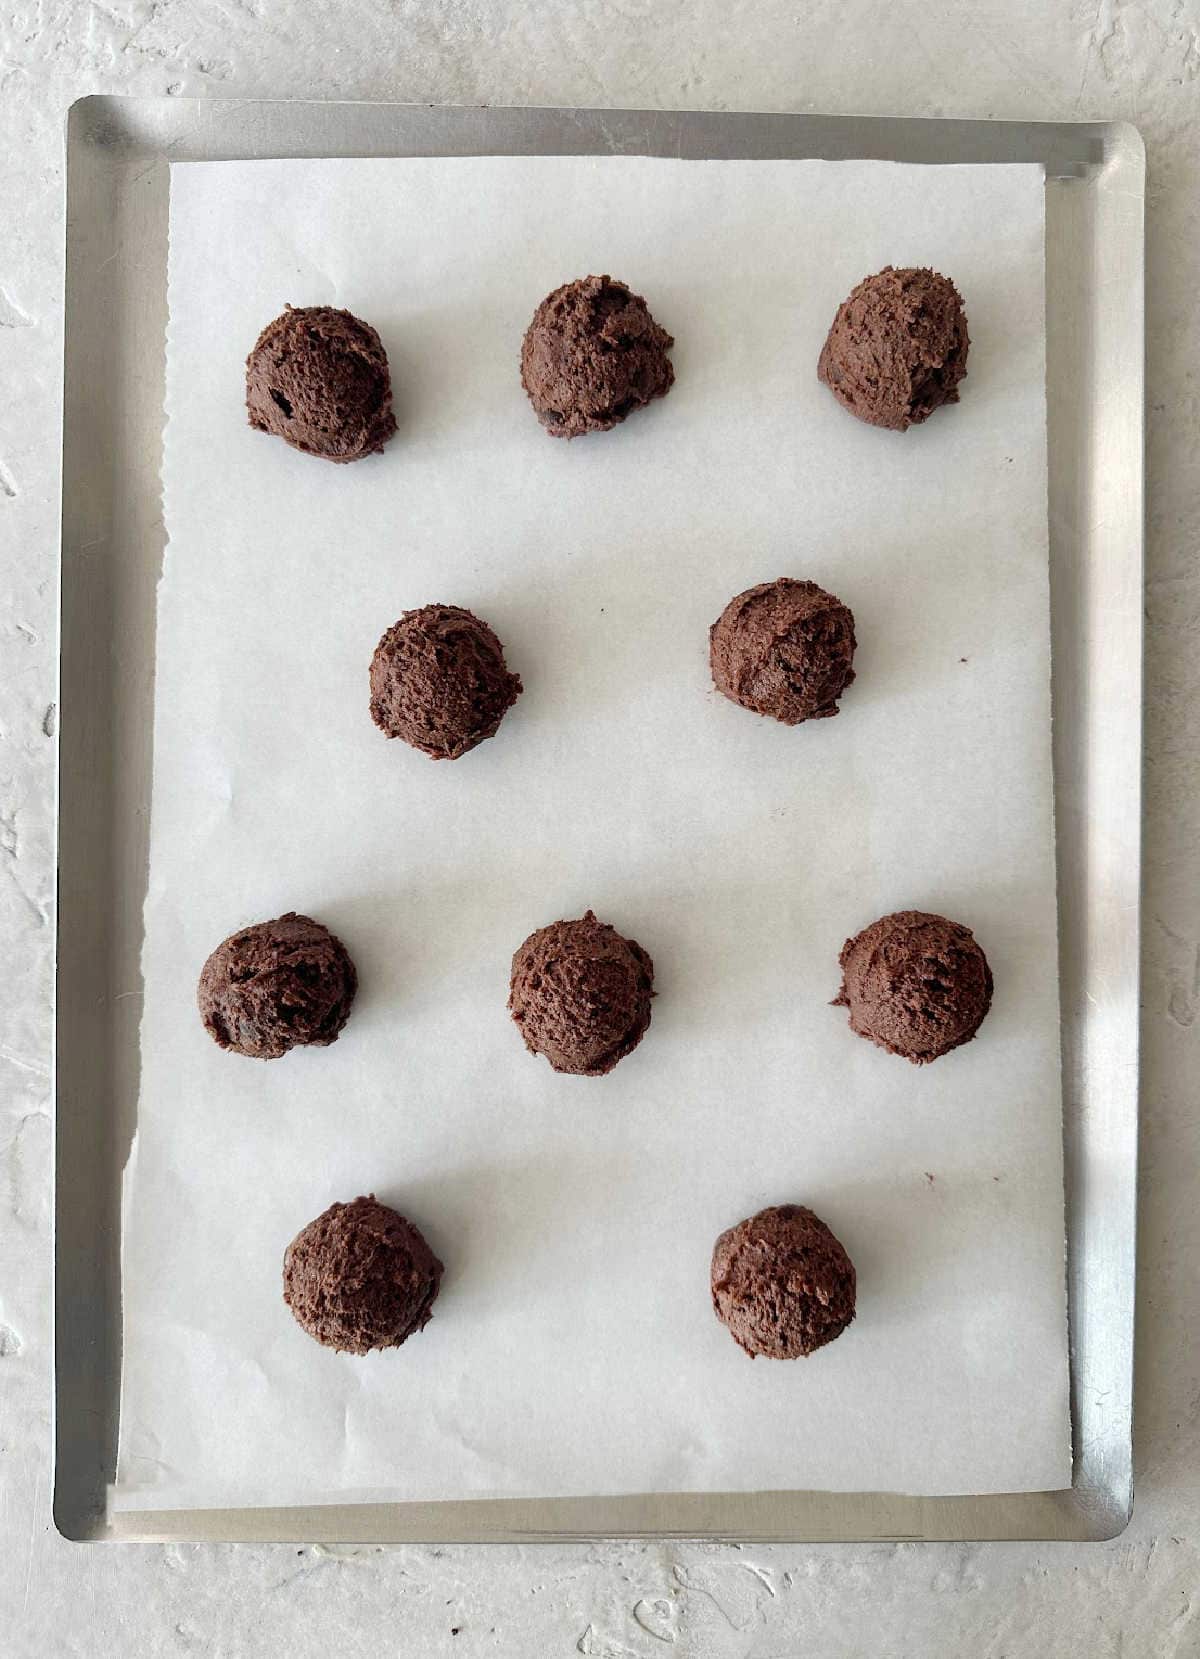 Metal pan with parchment paper and chocolate cookies before baking.